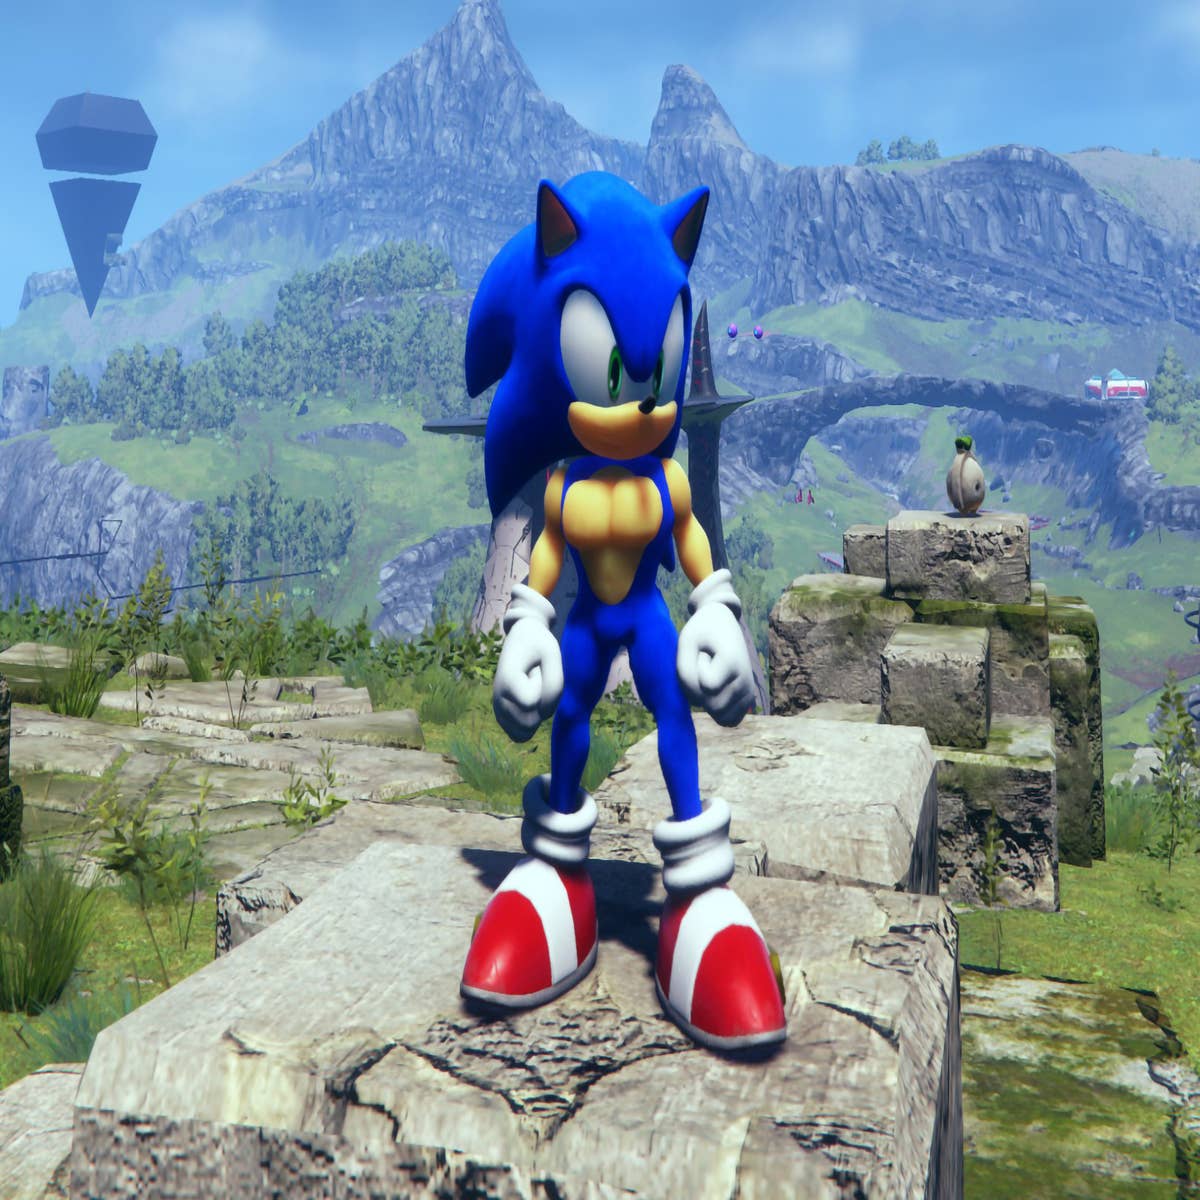 Sonic Frontiers: Improvements A Sequel Could Make